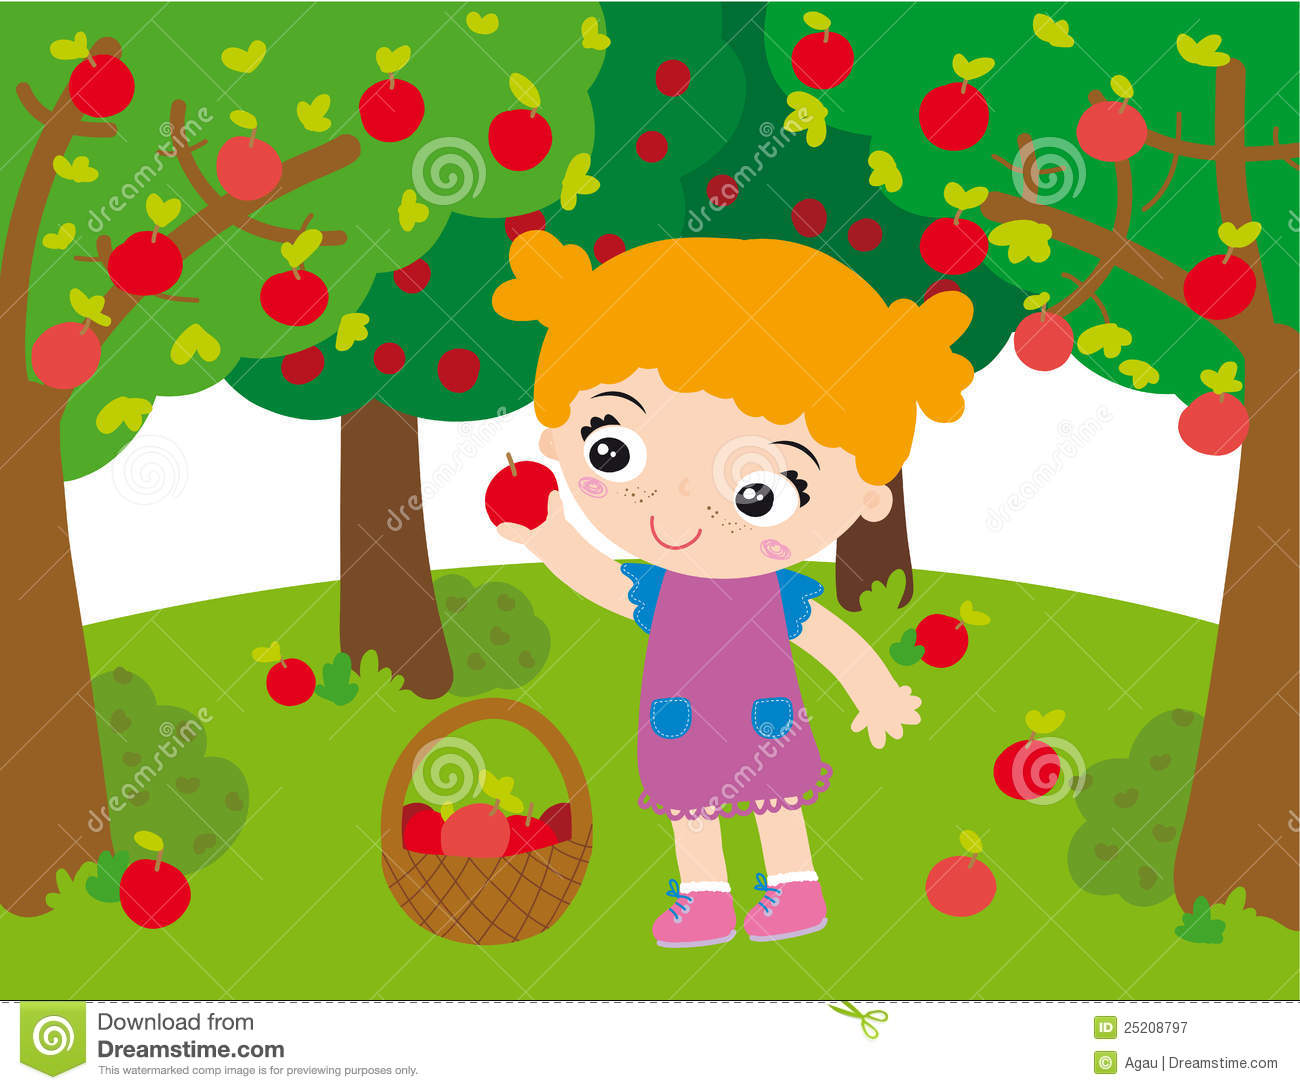 Illustration Of Little Girl In Orchard Picking Up Apples